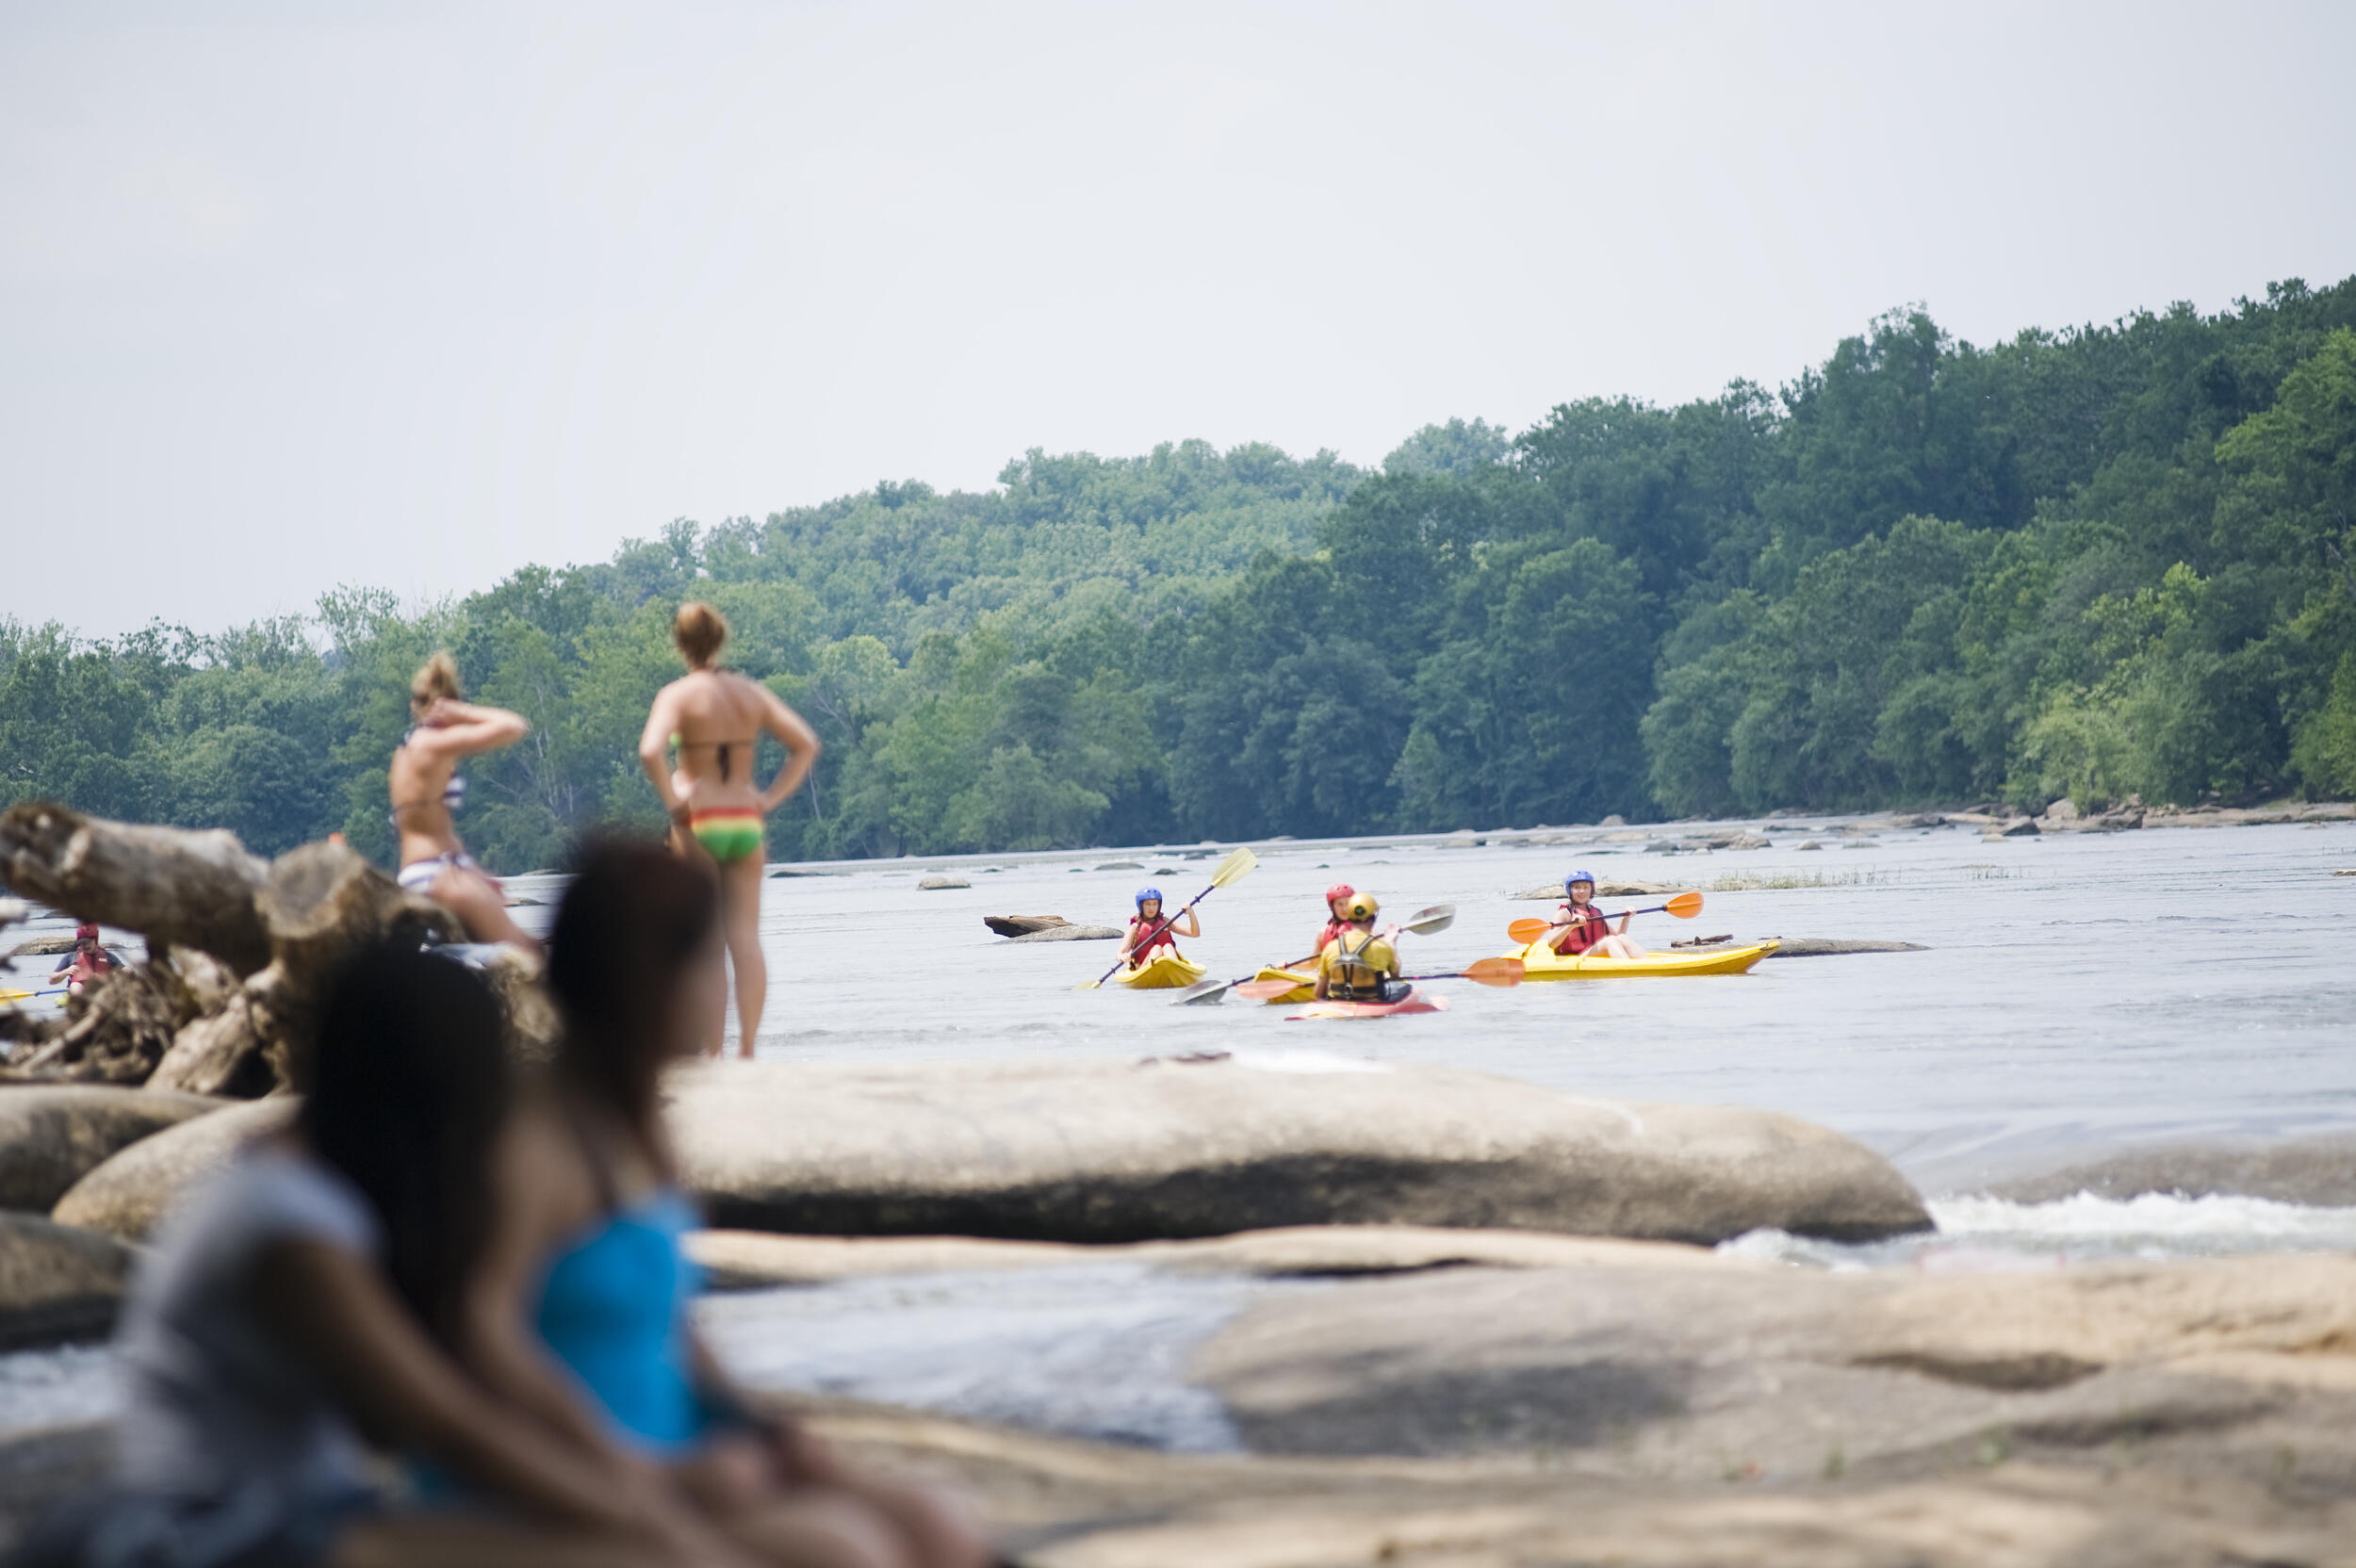 The iconic James River provides VCU students with recreational opportunities and a place to explore and study. (Photo by Tom Kojcsich, University Relations)